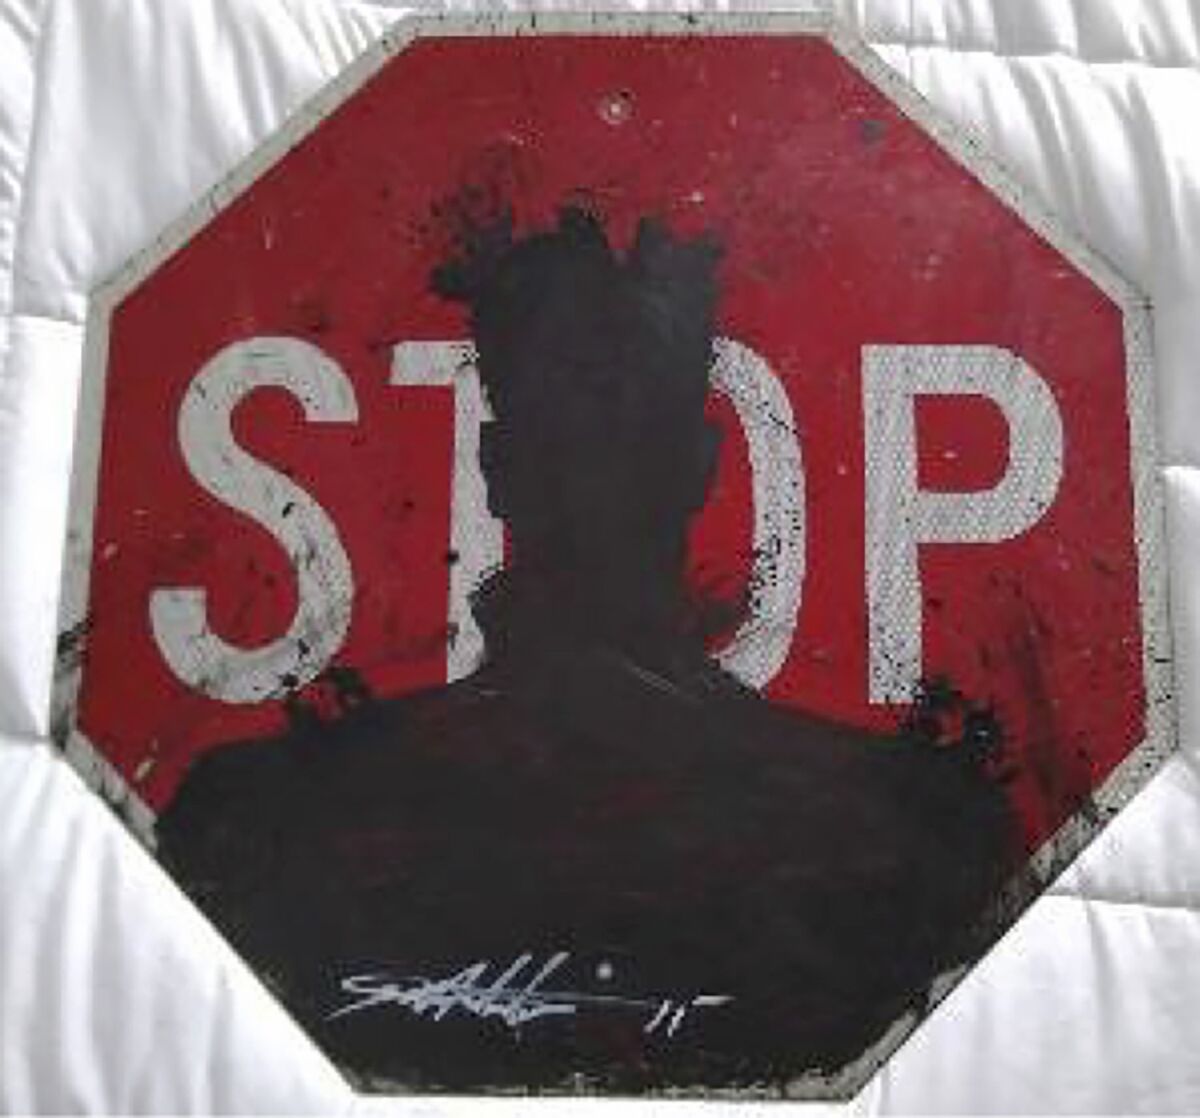 A shadow figure head and shoulders painted on a stop sign in the style of Richard Hambleton